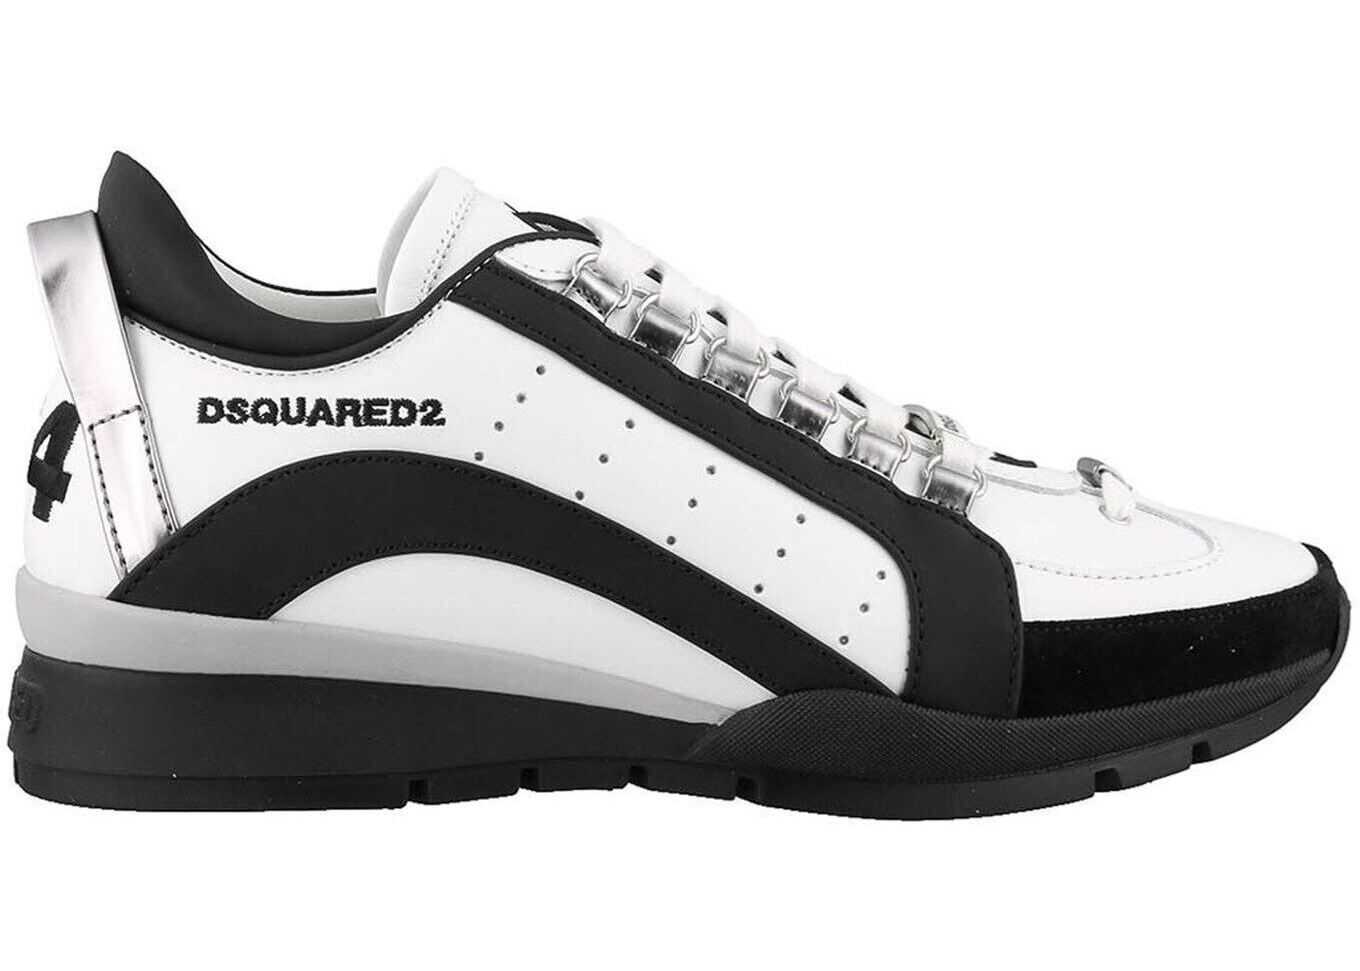 DSQUARED2 551 Sneakers In White And Black* White